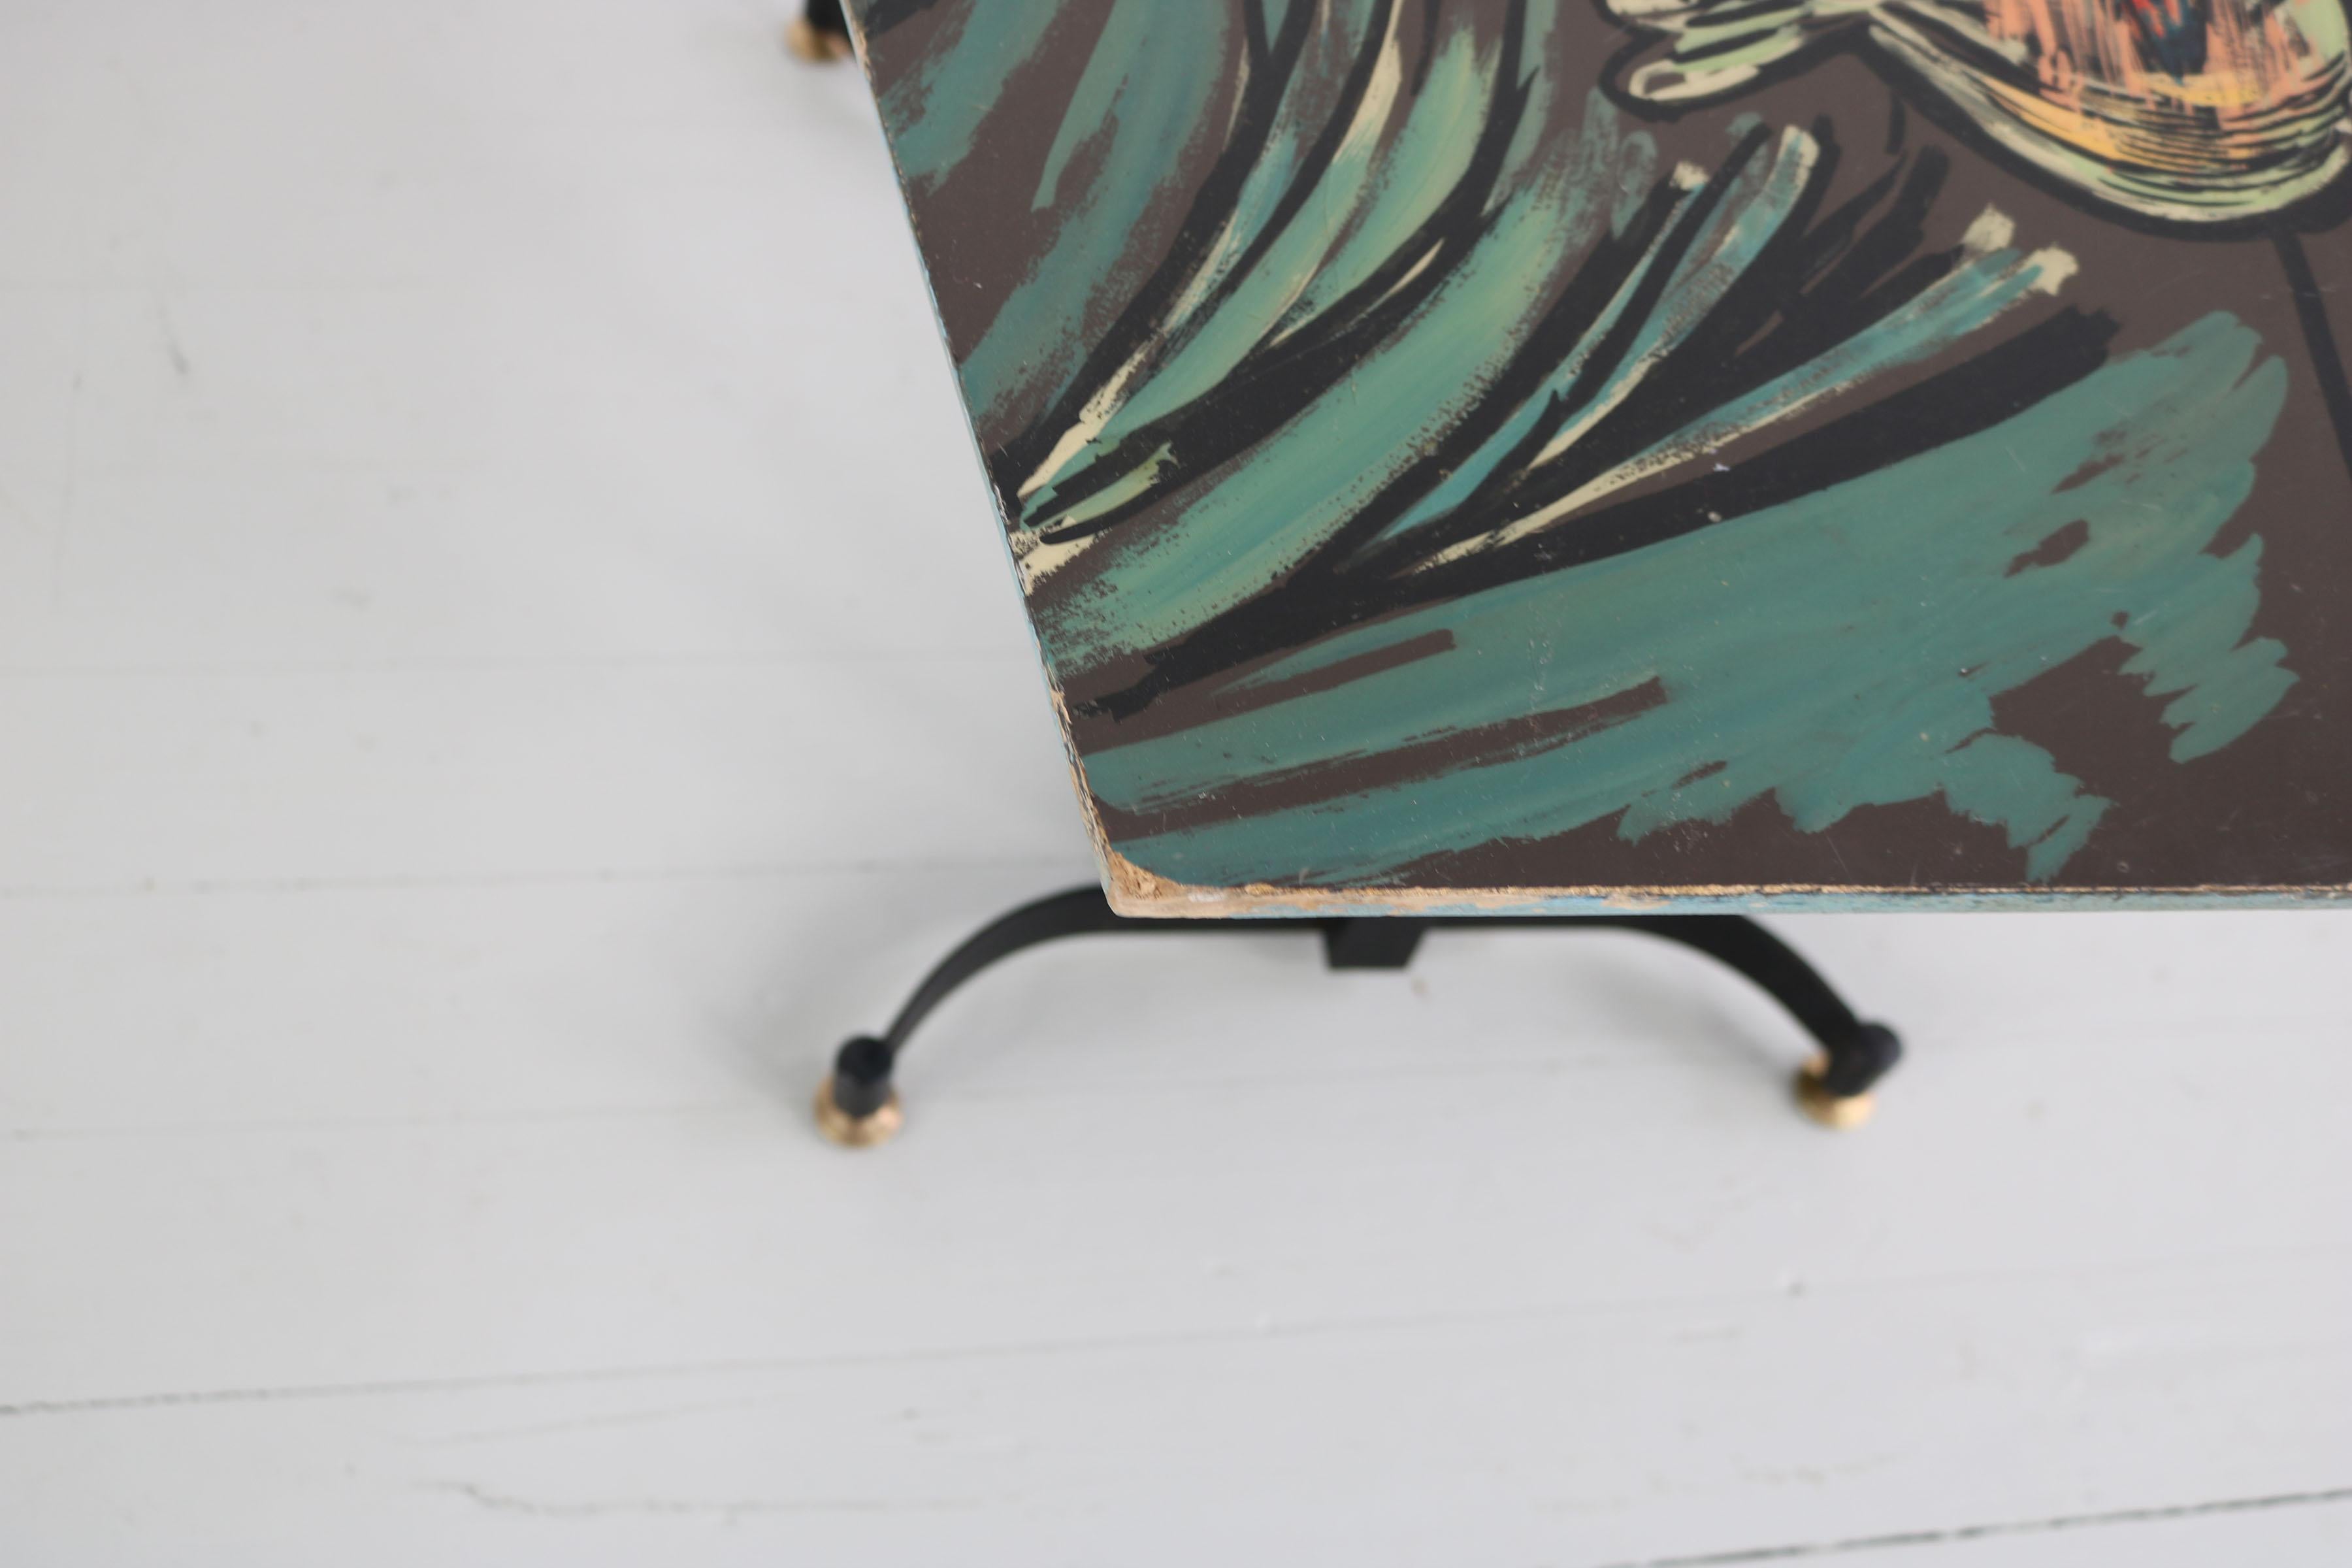 Italian Dark Sofa Table with Colorful Hand-Painted Motives on Table Top, 1950s For Sale 4